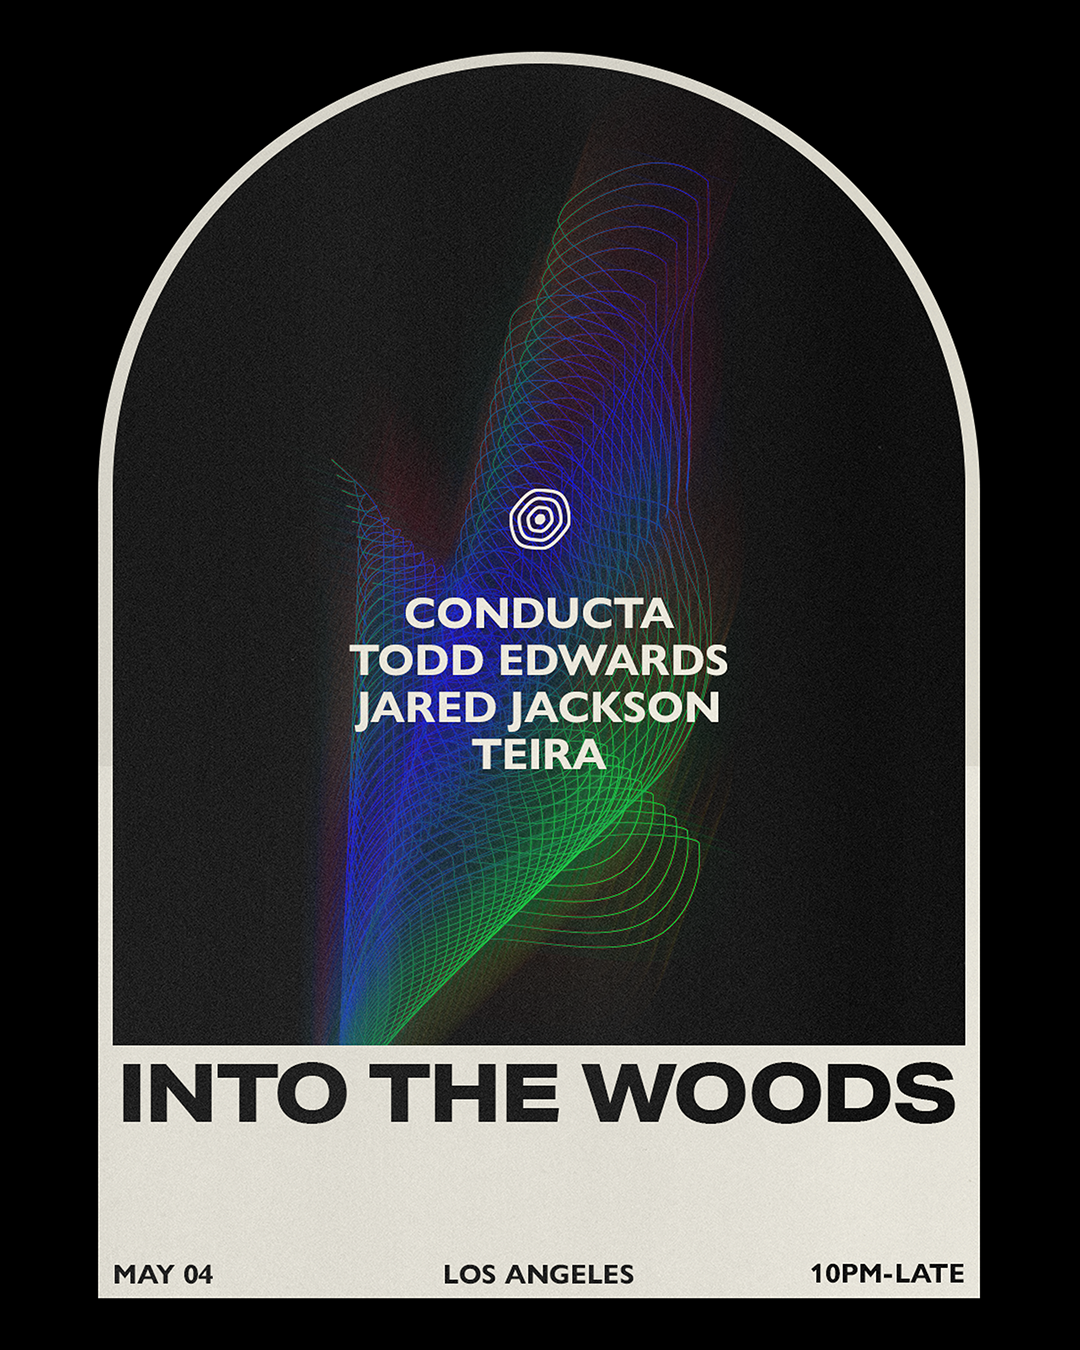 Into The Woods presents Conducta b2b Todd Edwards, Jared Jackson (Soulection), and Teira - Página frontal